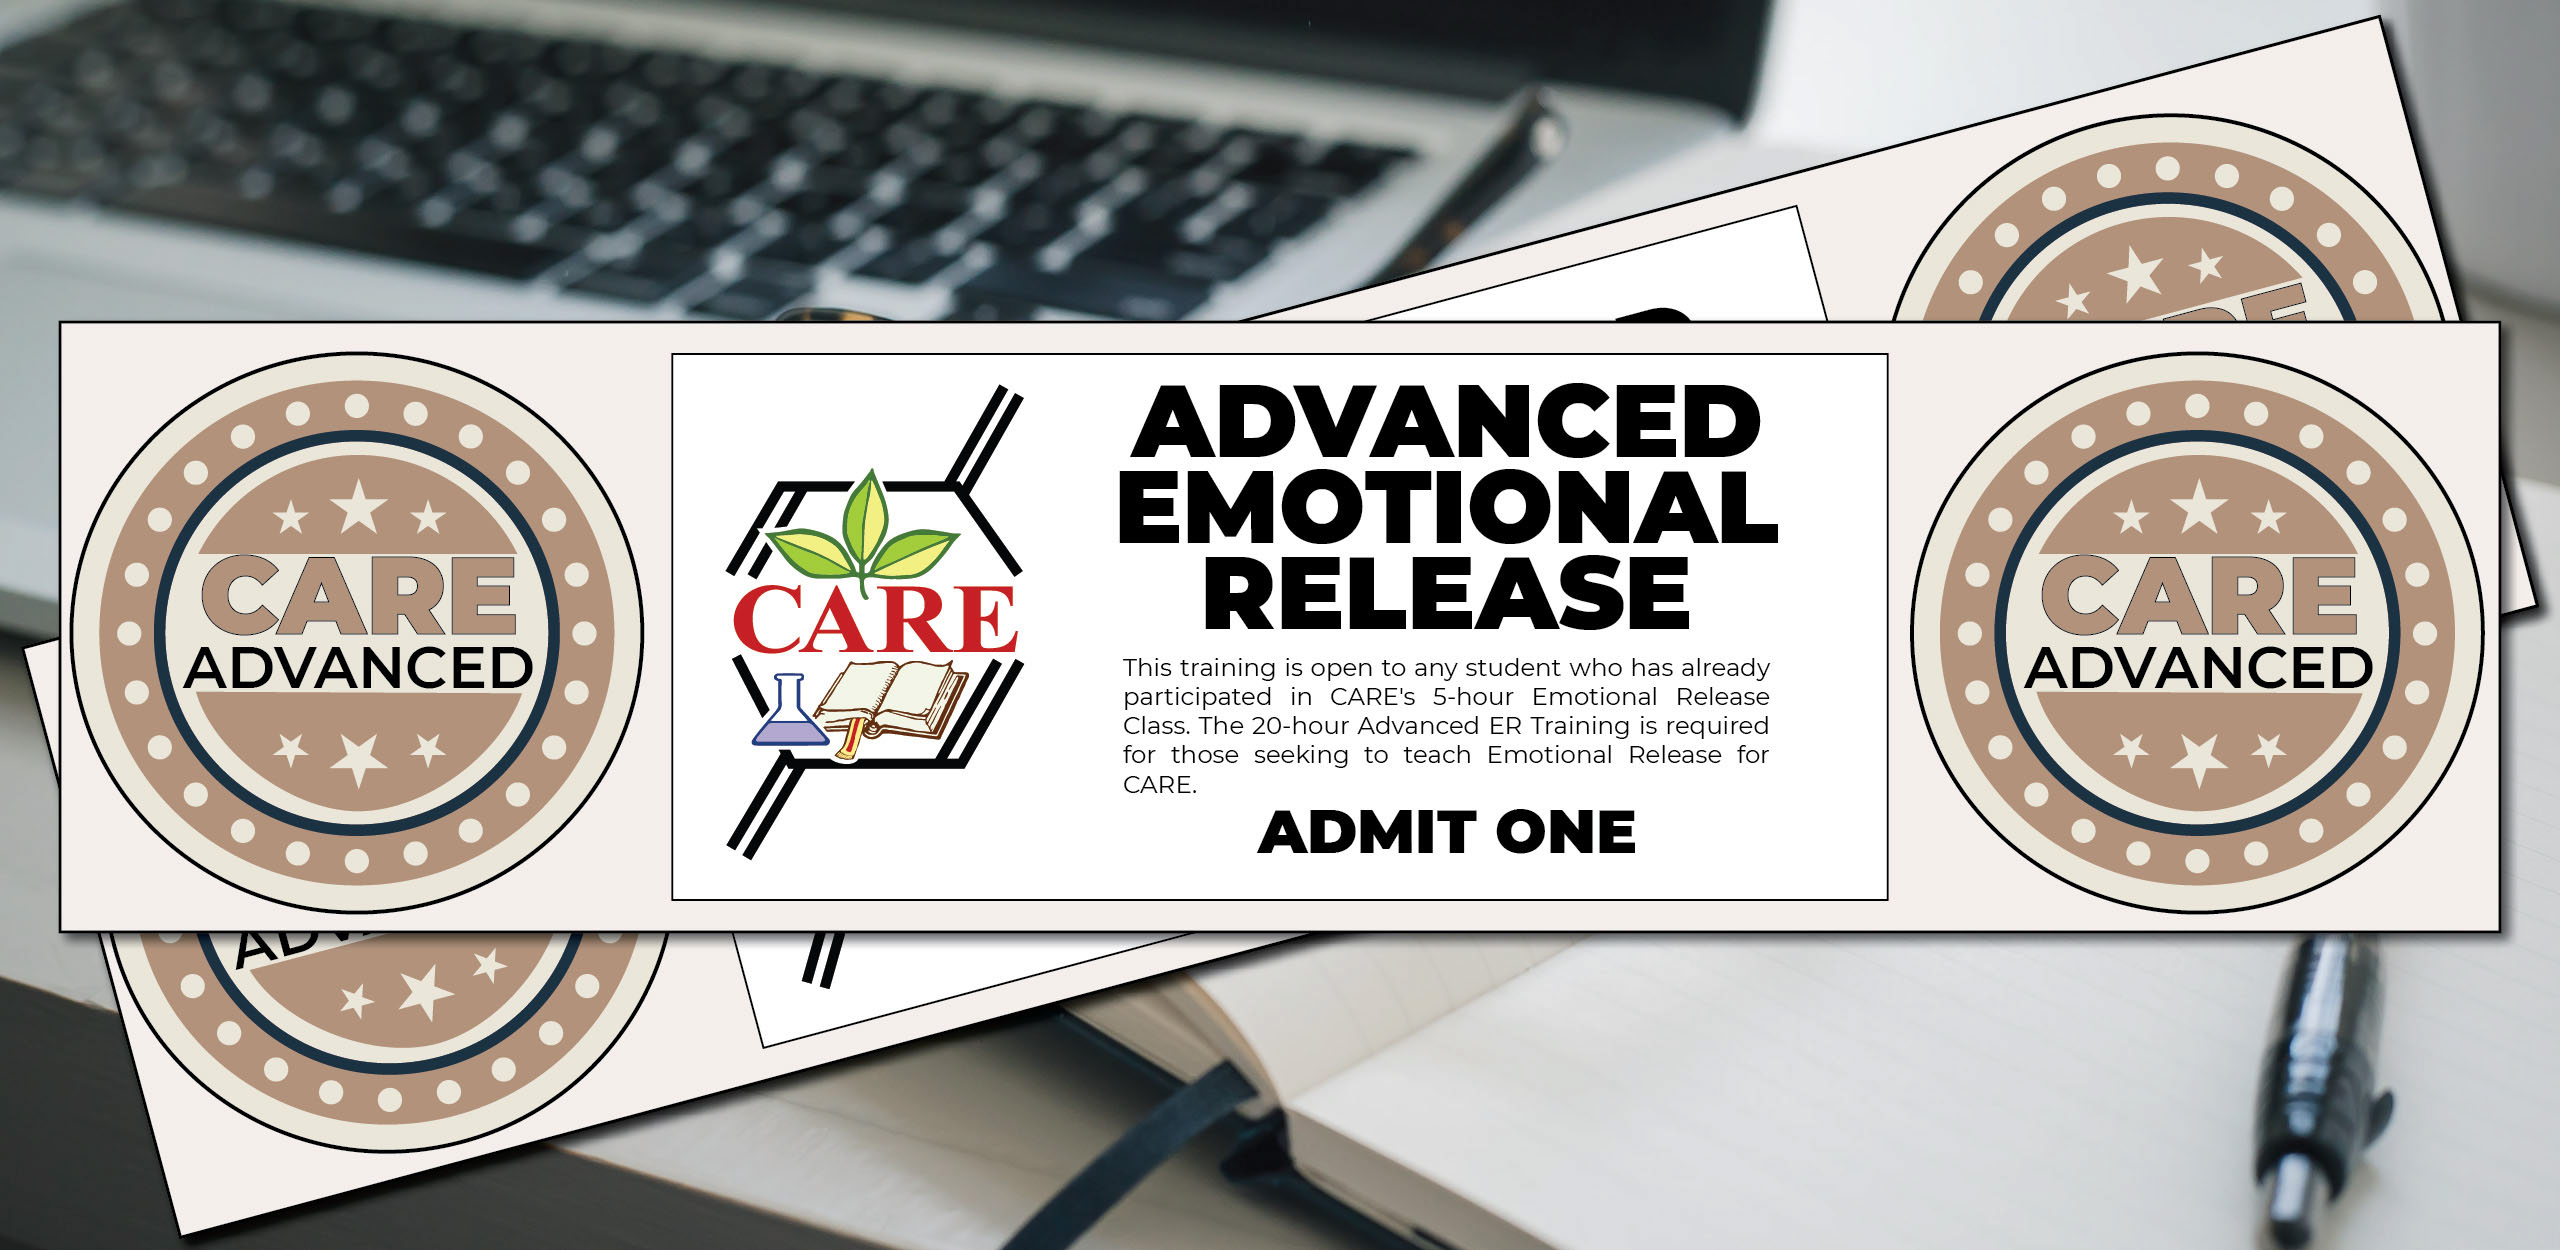 CARE Advanced - Emotional Release